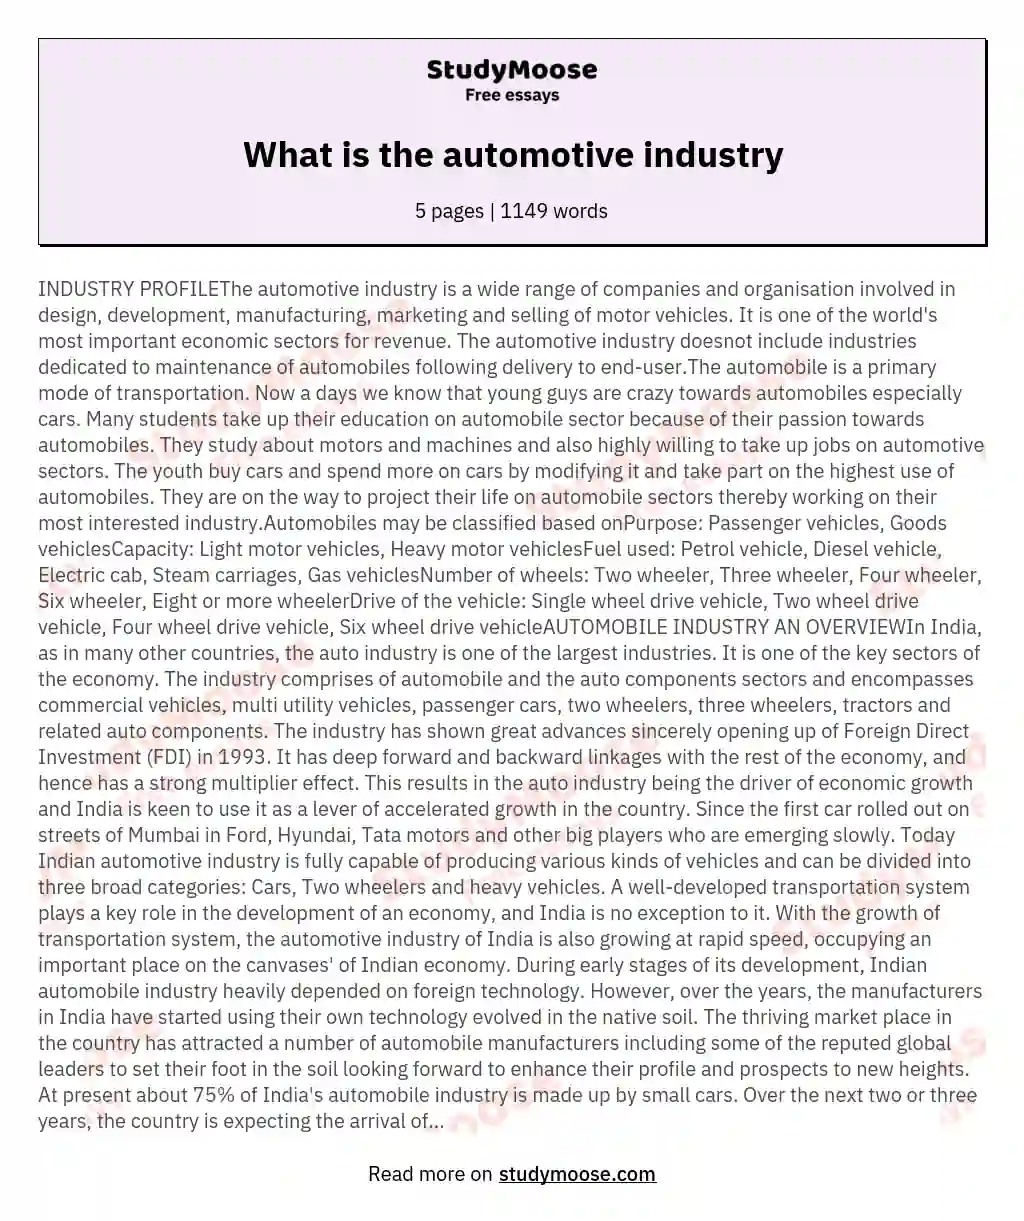 What is the automotive industry